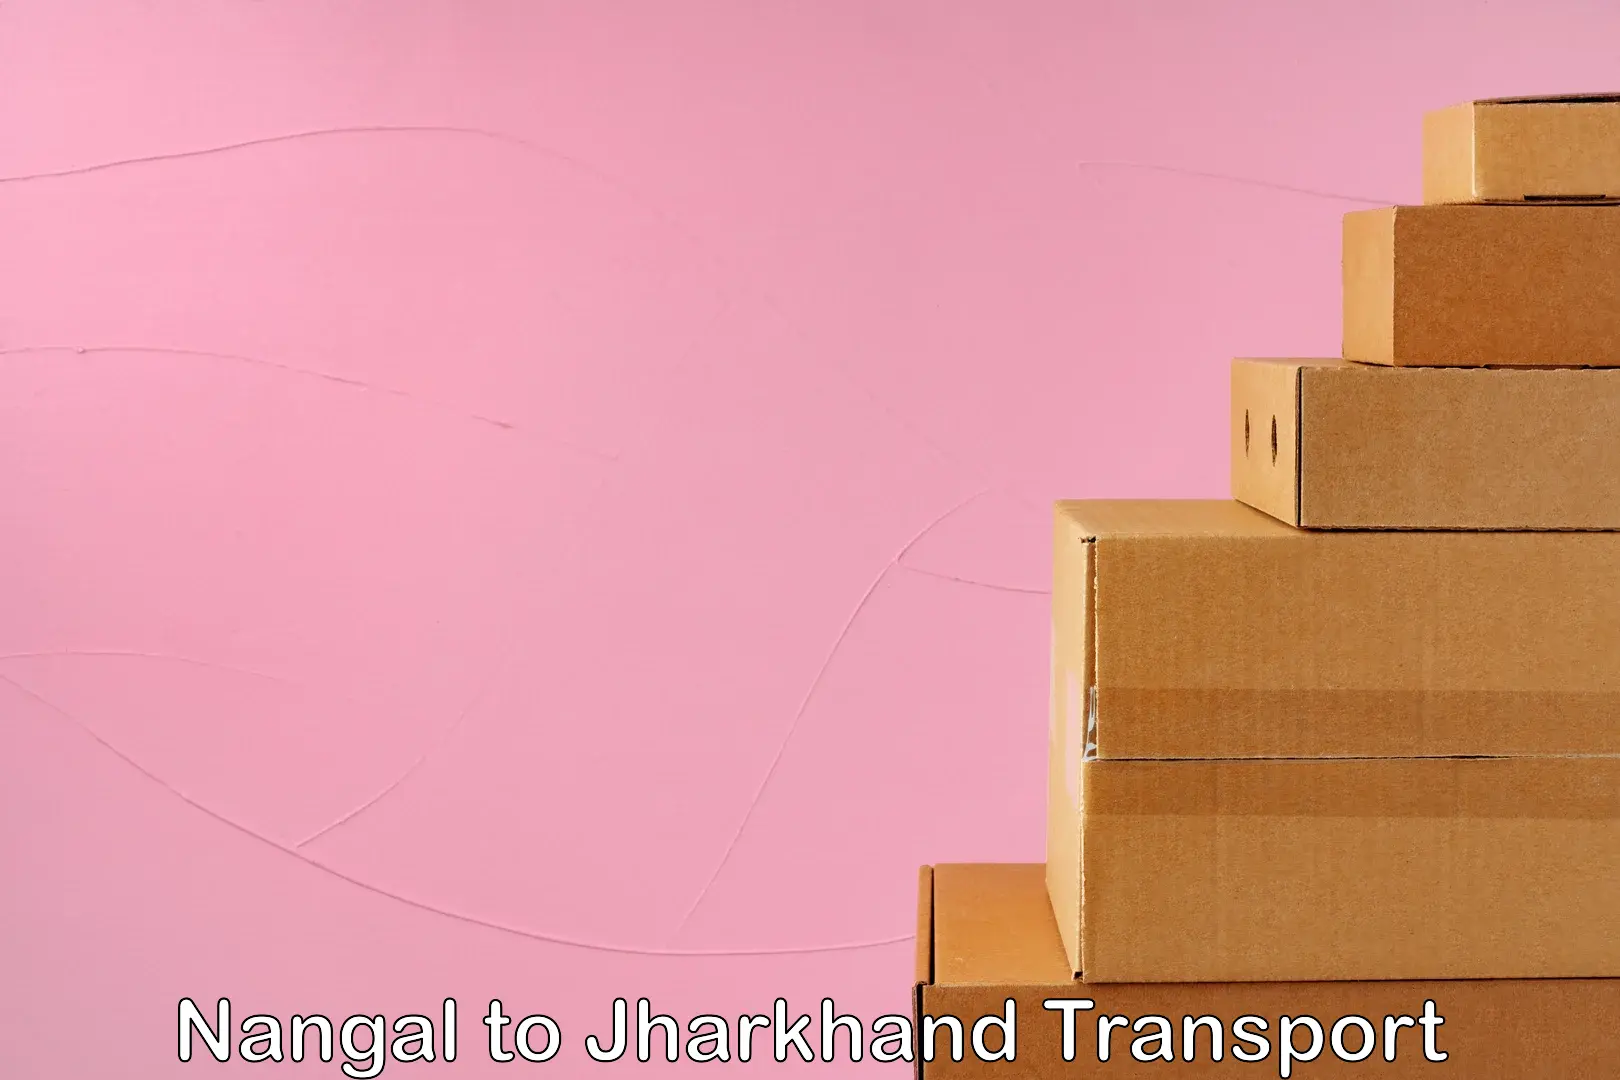 Truck transport companies in India Nangal to Jharkhand